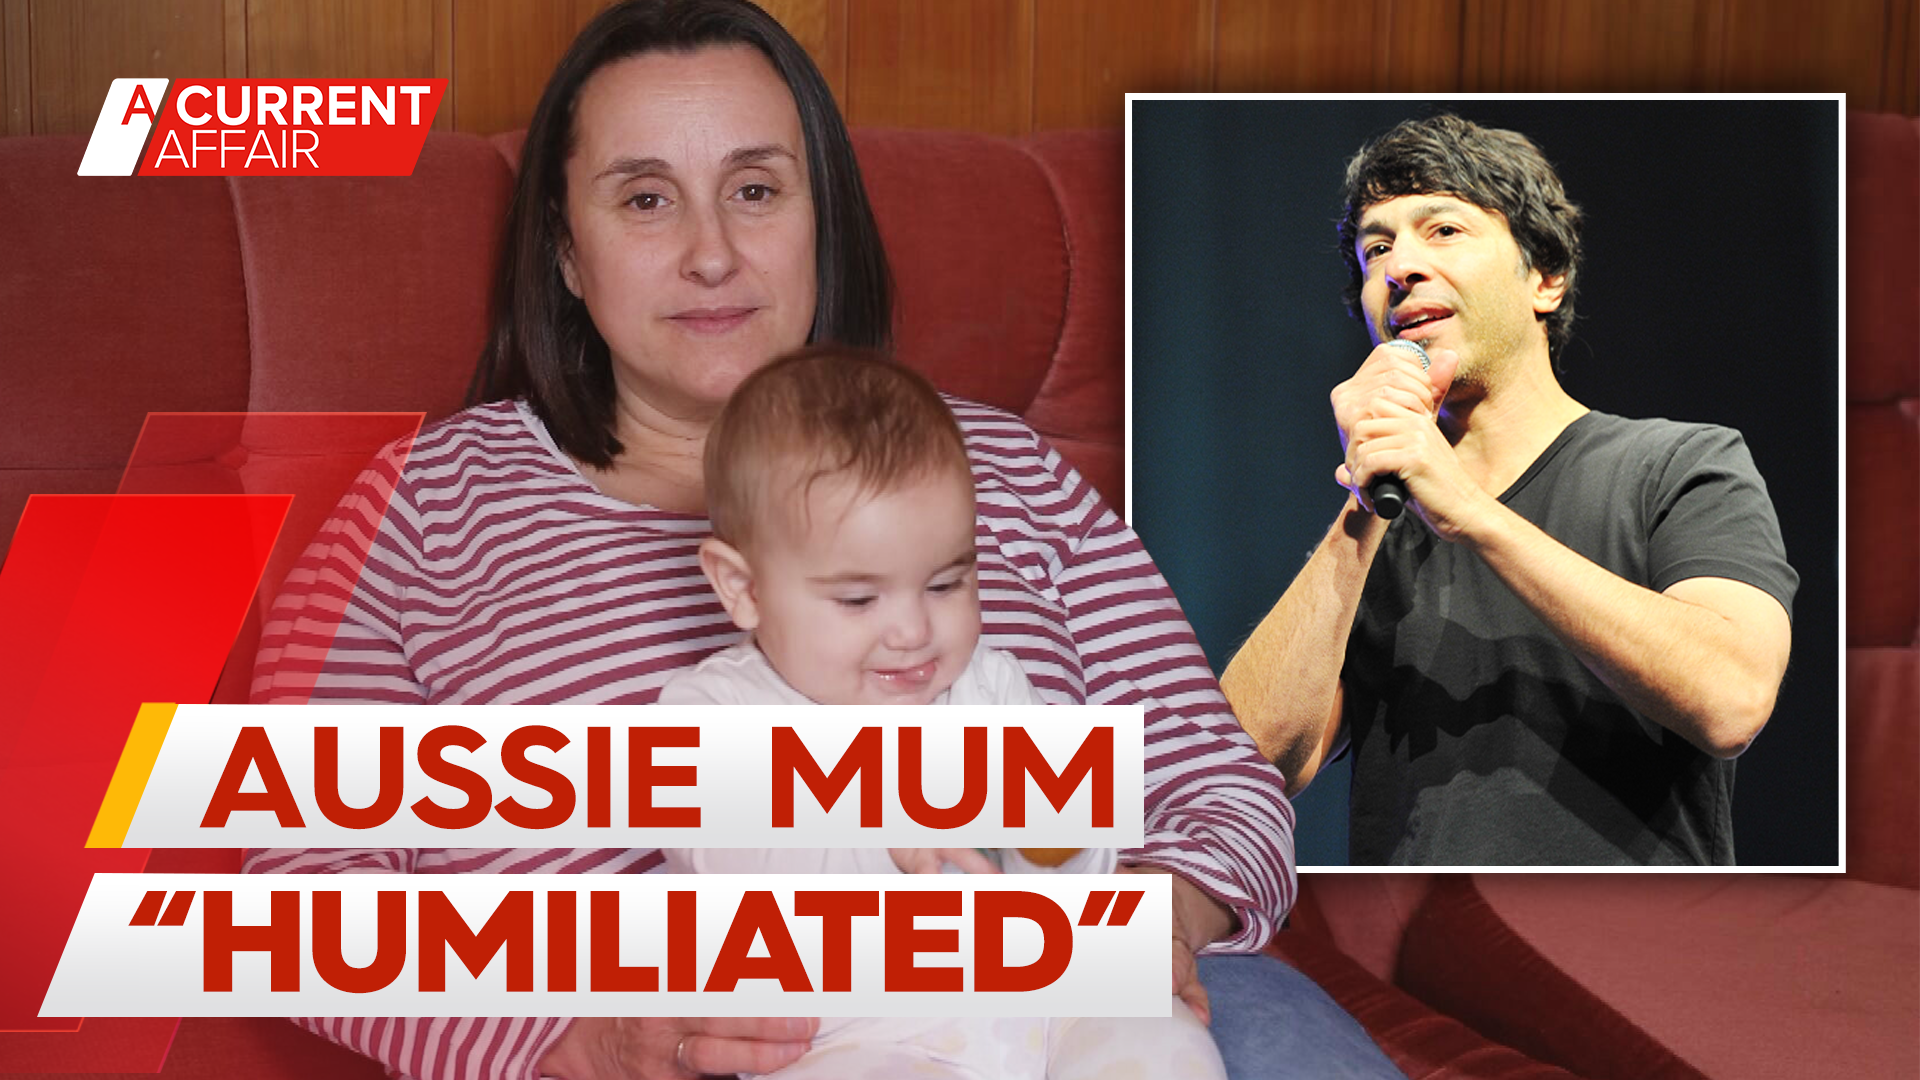 Mum speaks out after she was kicked out of comedy show